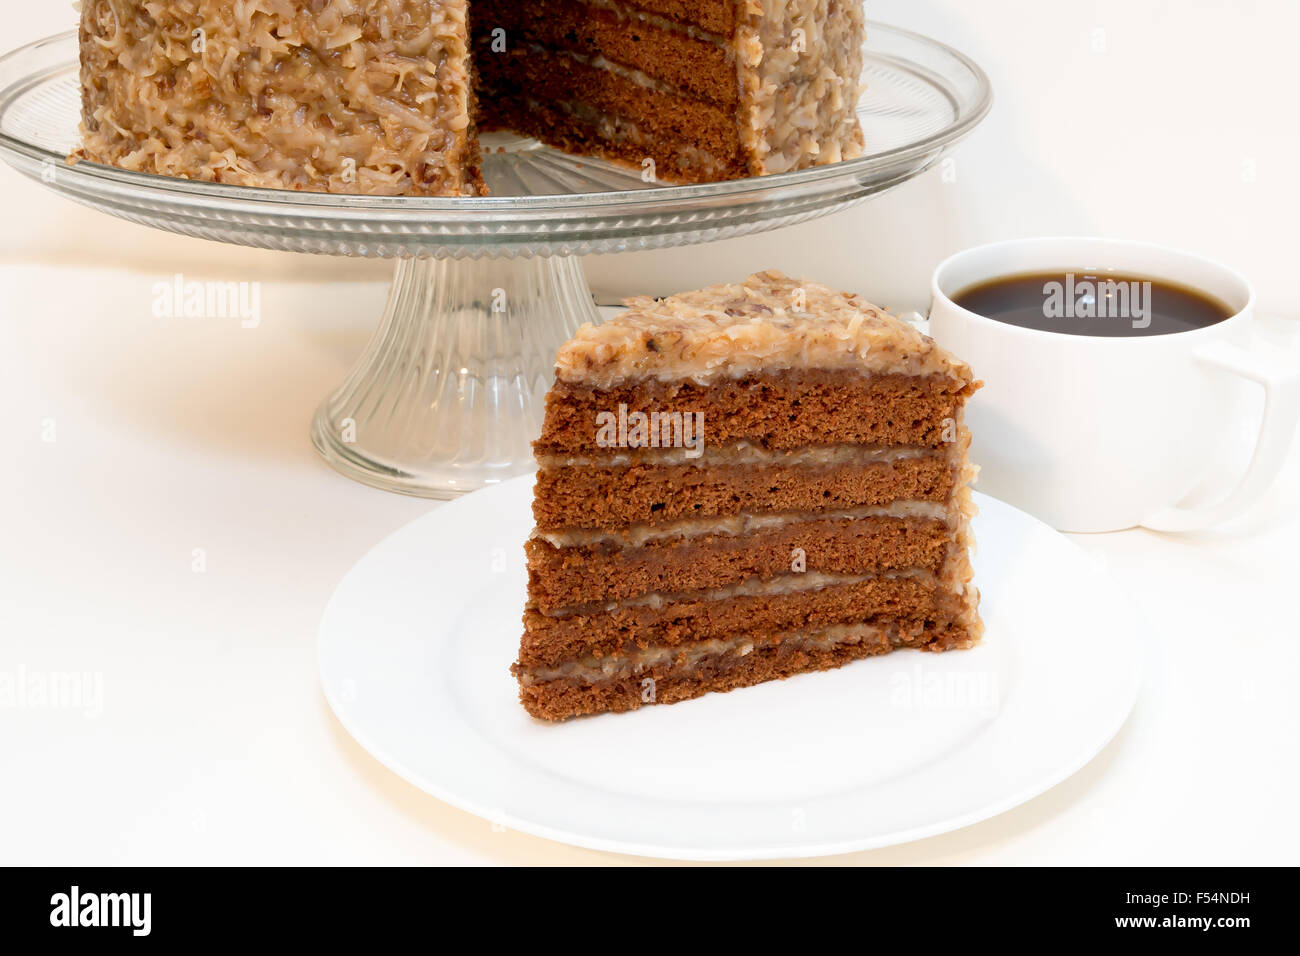 Slice of german chocolate cake removed from whole cake  with cup of coffee.  Isolated on white background. Stock Photo